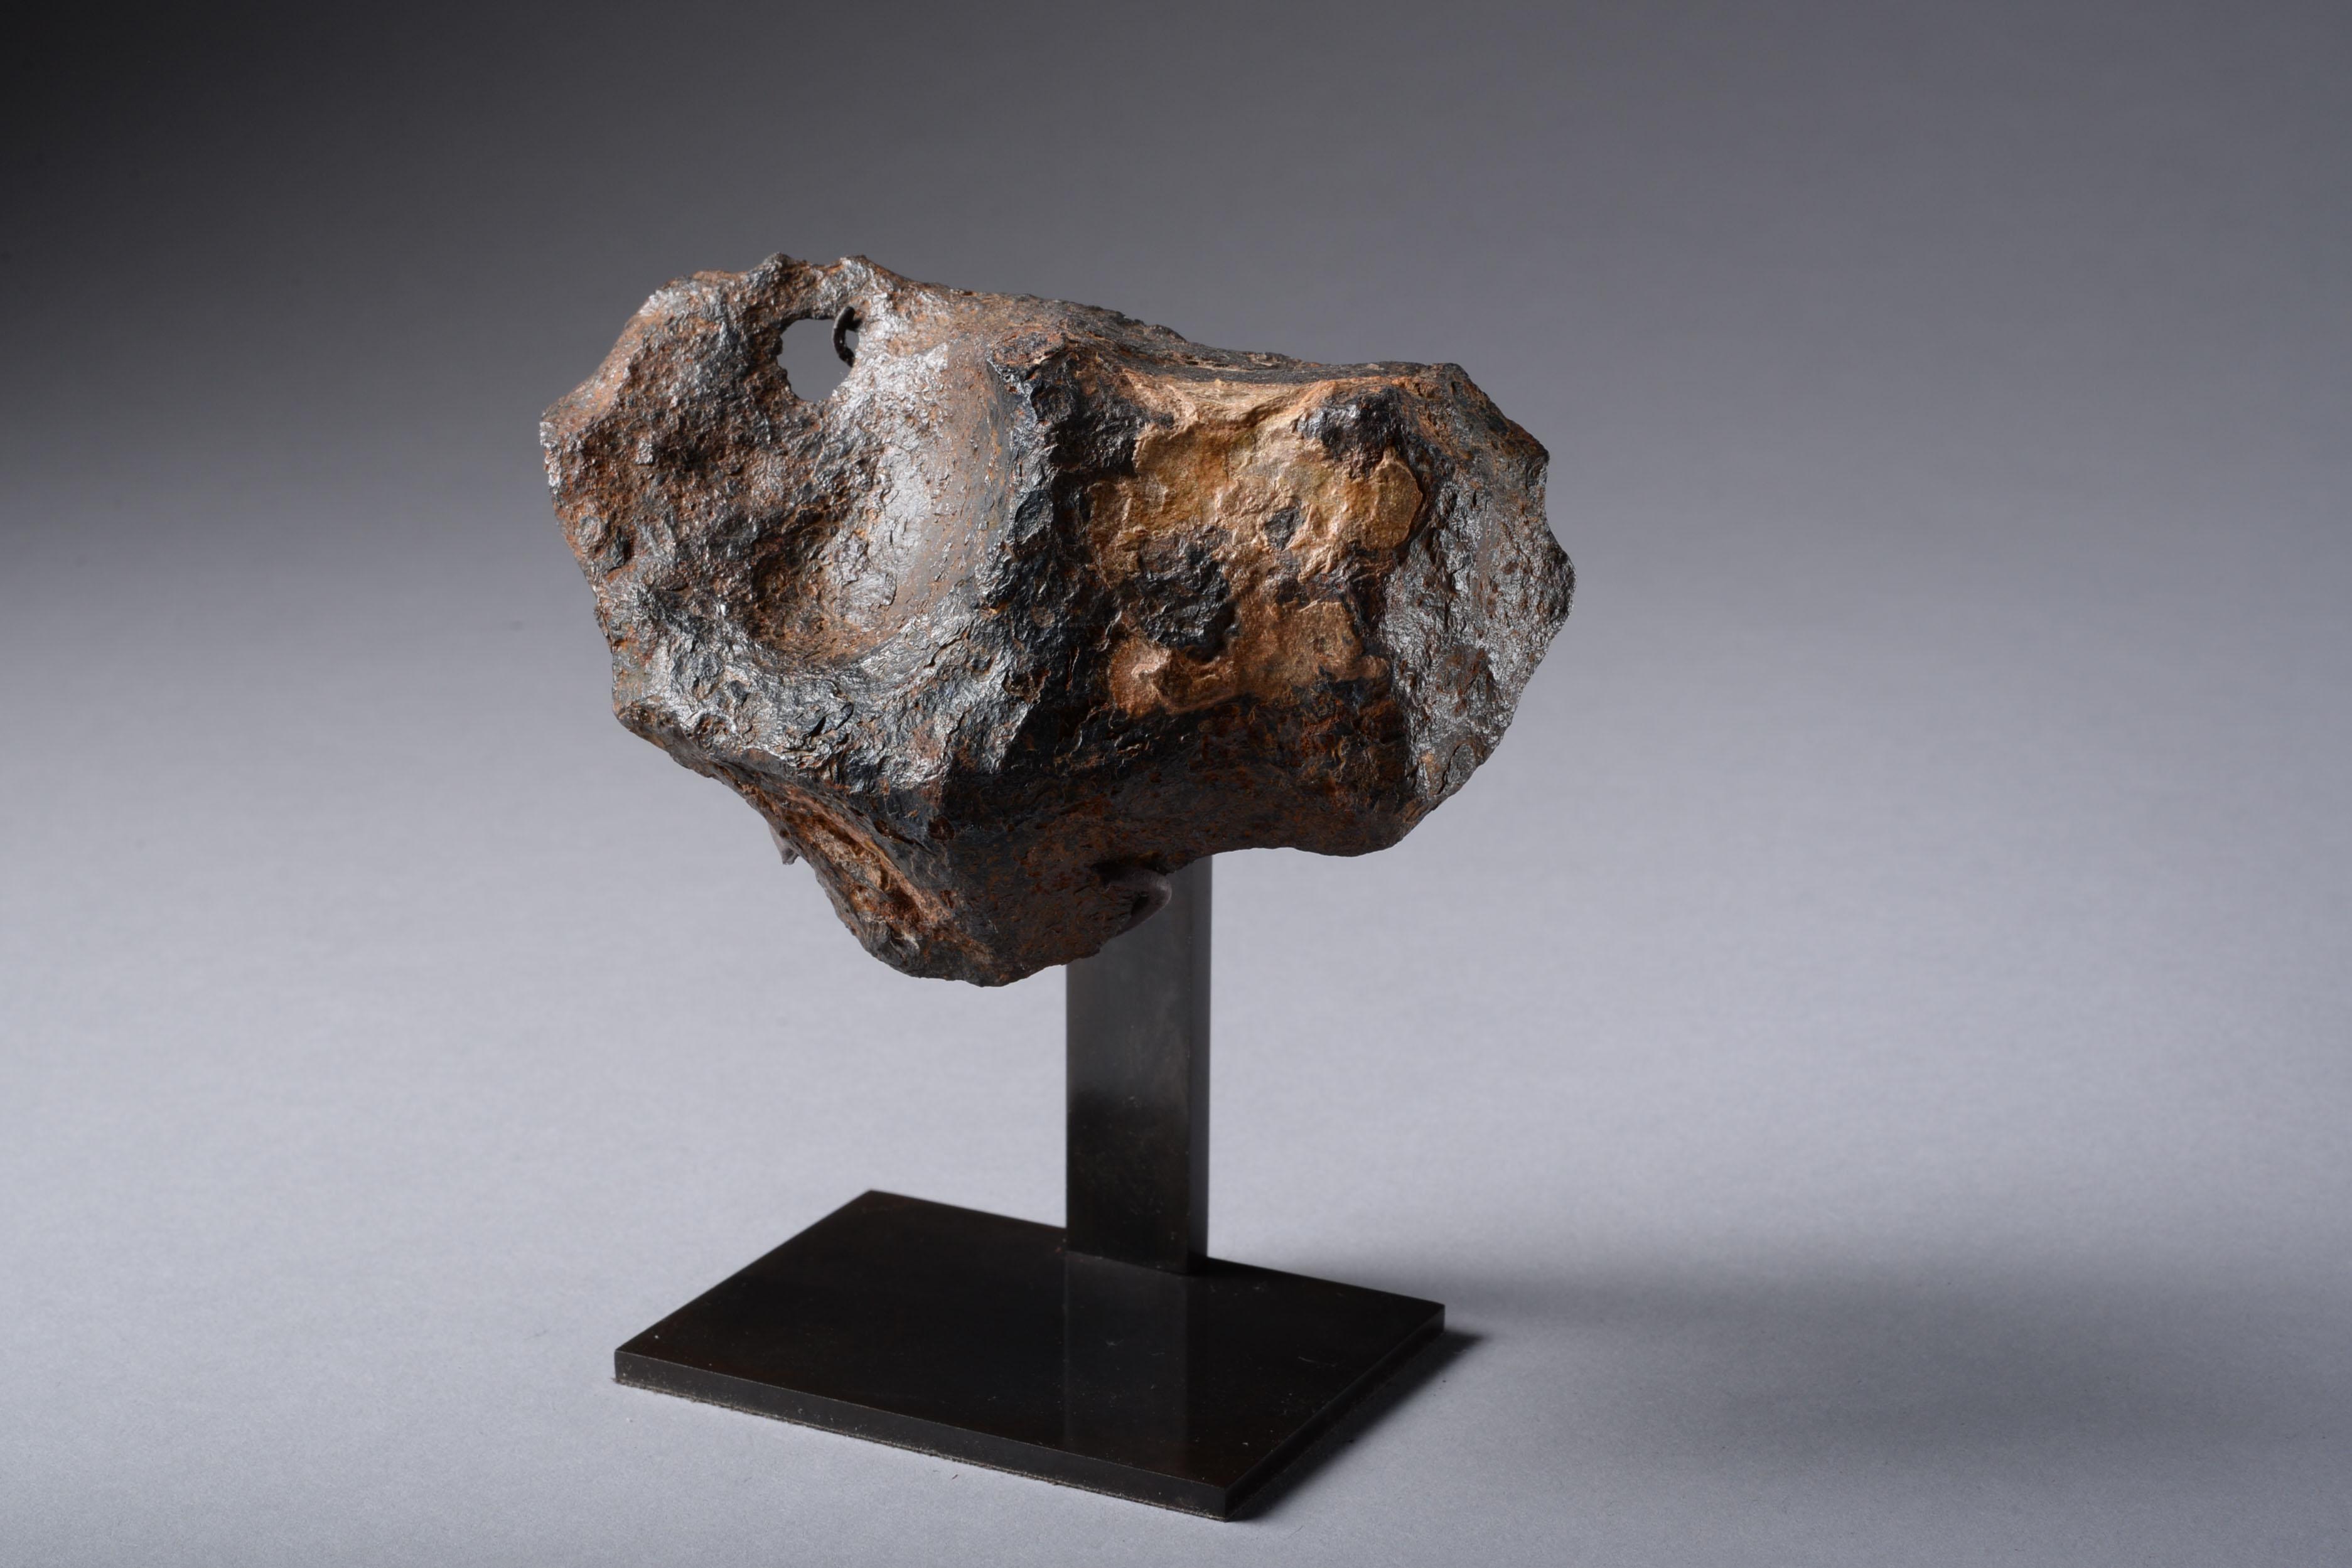 A sculptural iron octahedrite meteorite from the famous Barringer crater, Coconino County, Arizona. A beautiful fragment dating to the formation of our solar system, around 4.57 billion years ago.

Around 50,000 years ago, a 160-foot-wide piece of